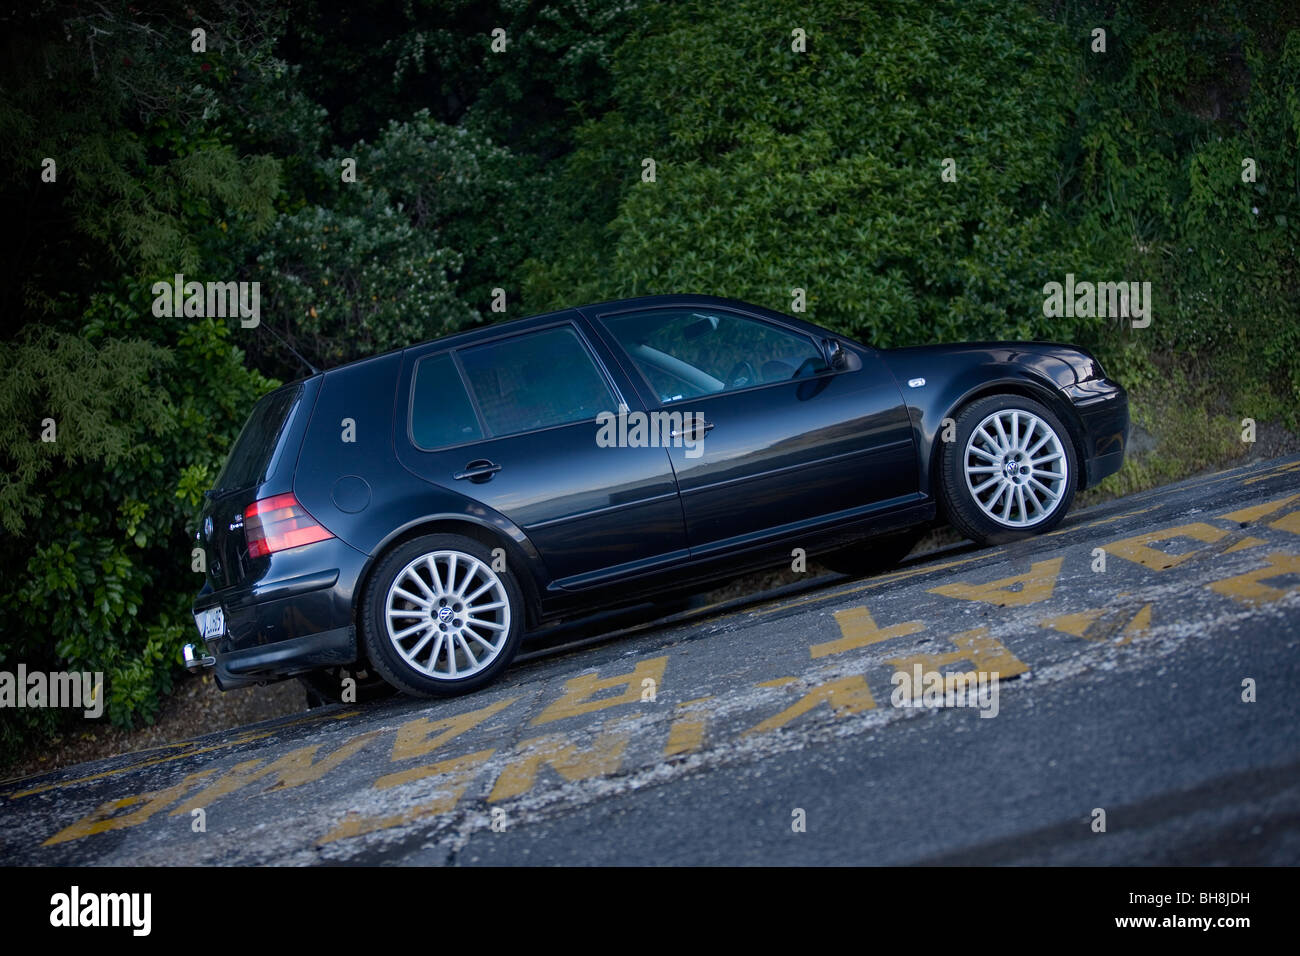 Halloween Groping Fed up 2002 Black Volkswagen 2.8L. V6 6 speed manual 4motion Golf with R32 18inch  rims Stock Photo - Alamy